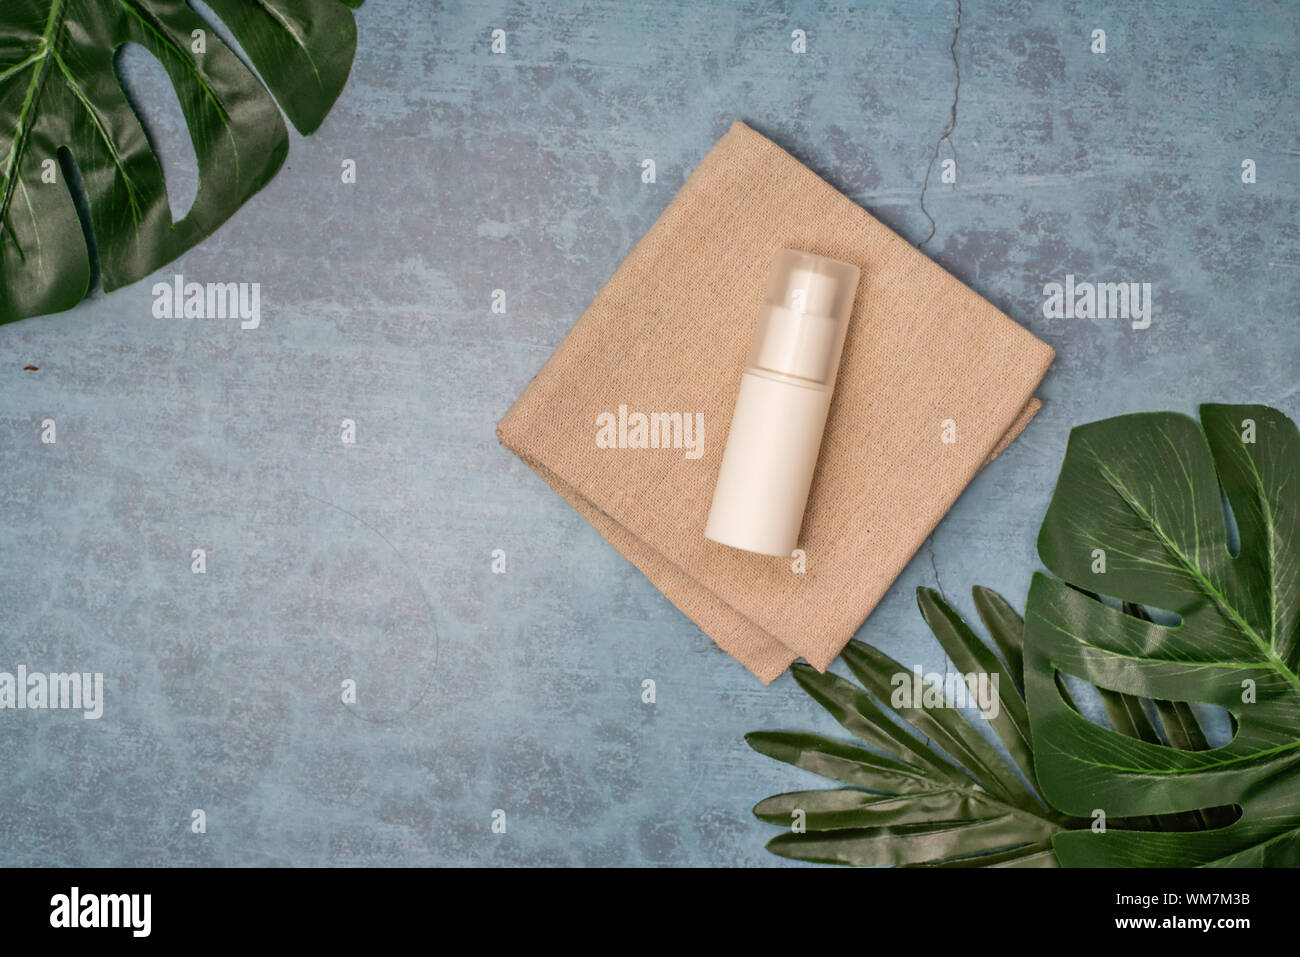 cosmetic product and tropical leaves on concert background, cosmetic product Stock Photo